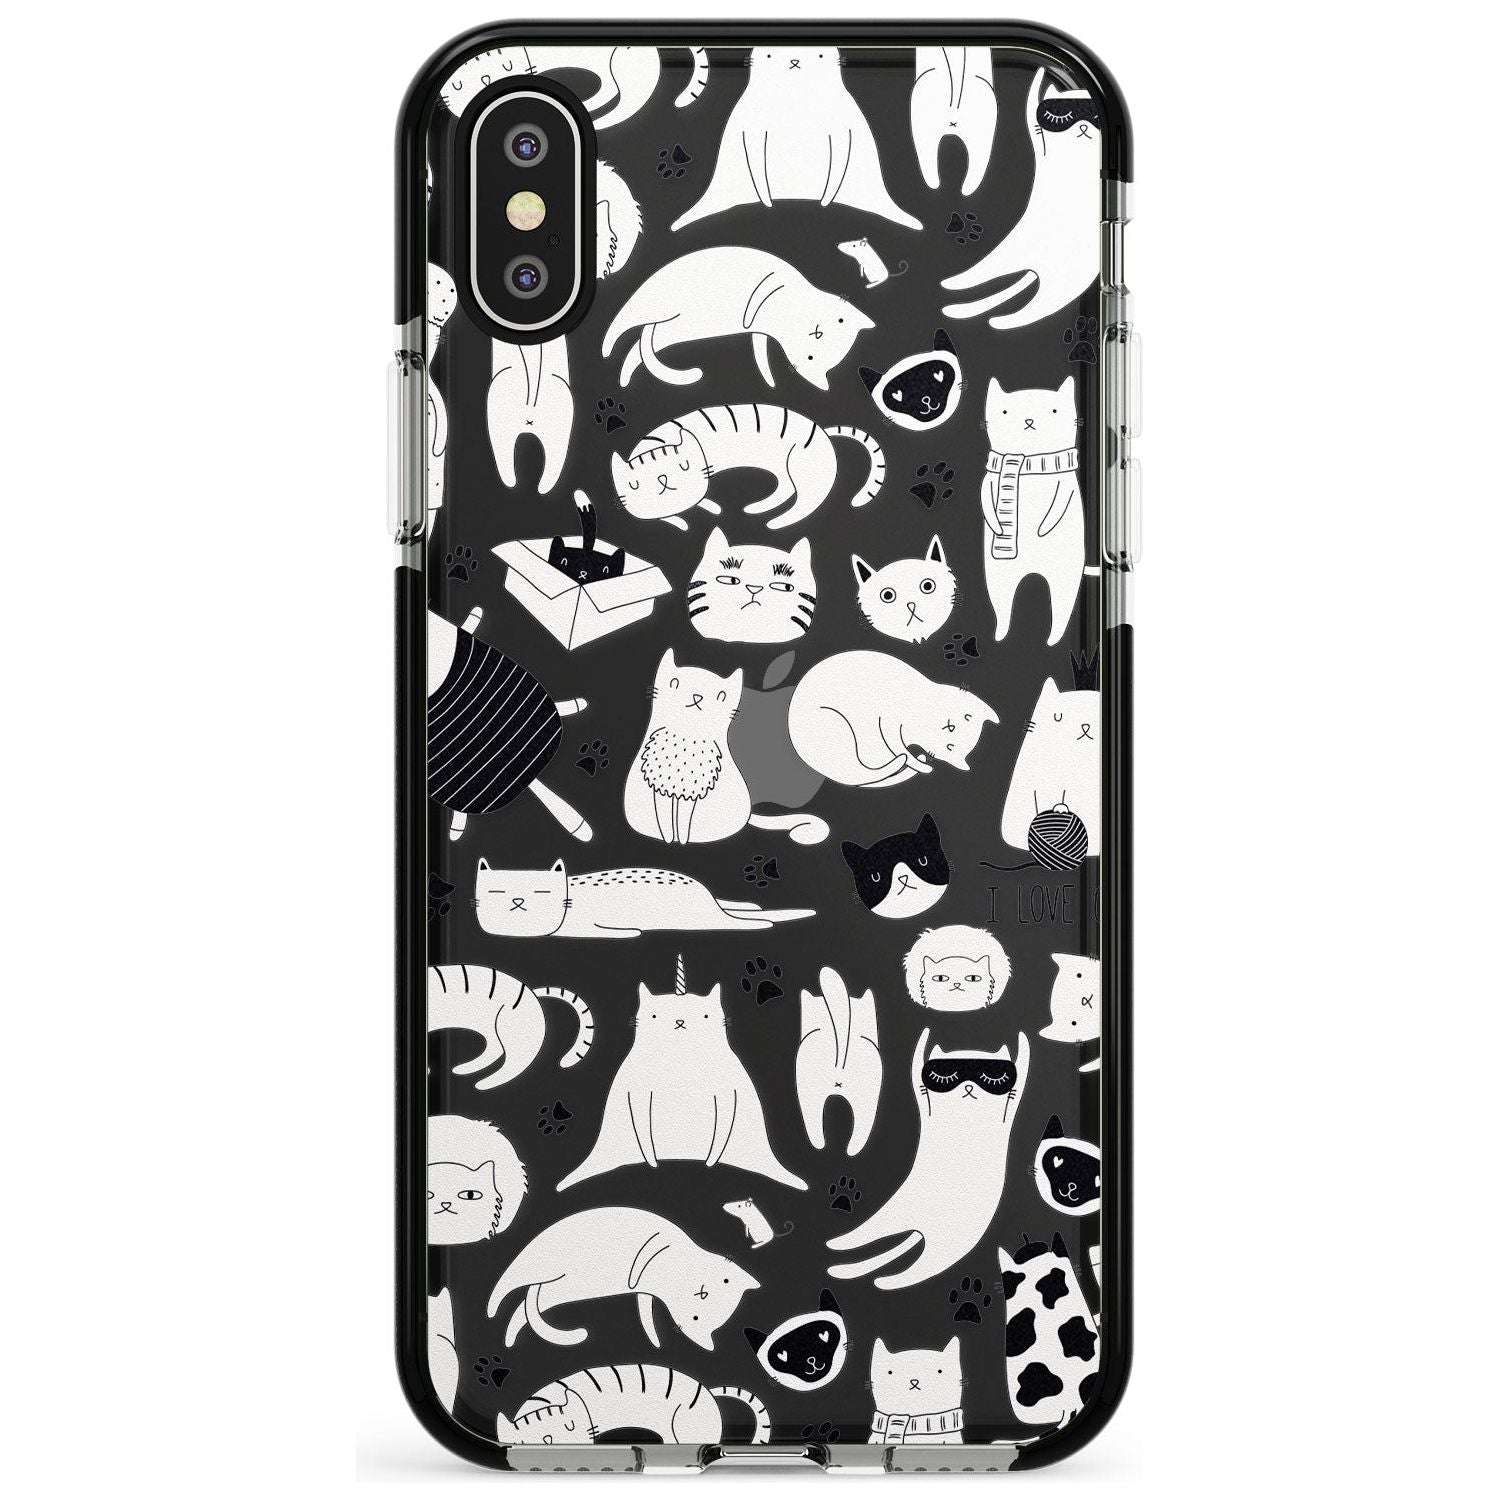 Cartoon Cat Collage - Black & White Pink Fade Impact Phone Case for iPhone X XS Max XR